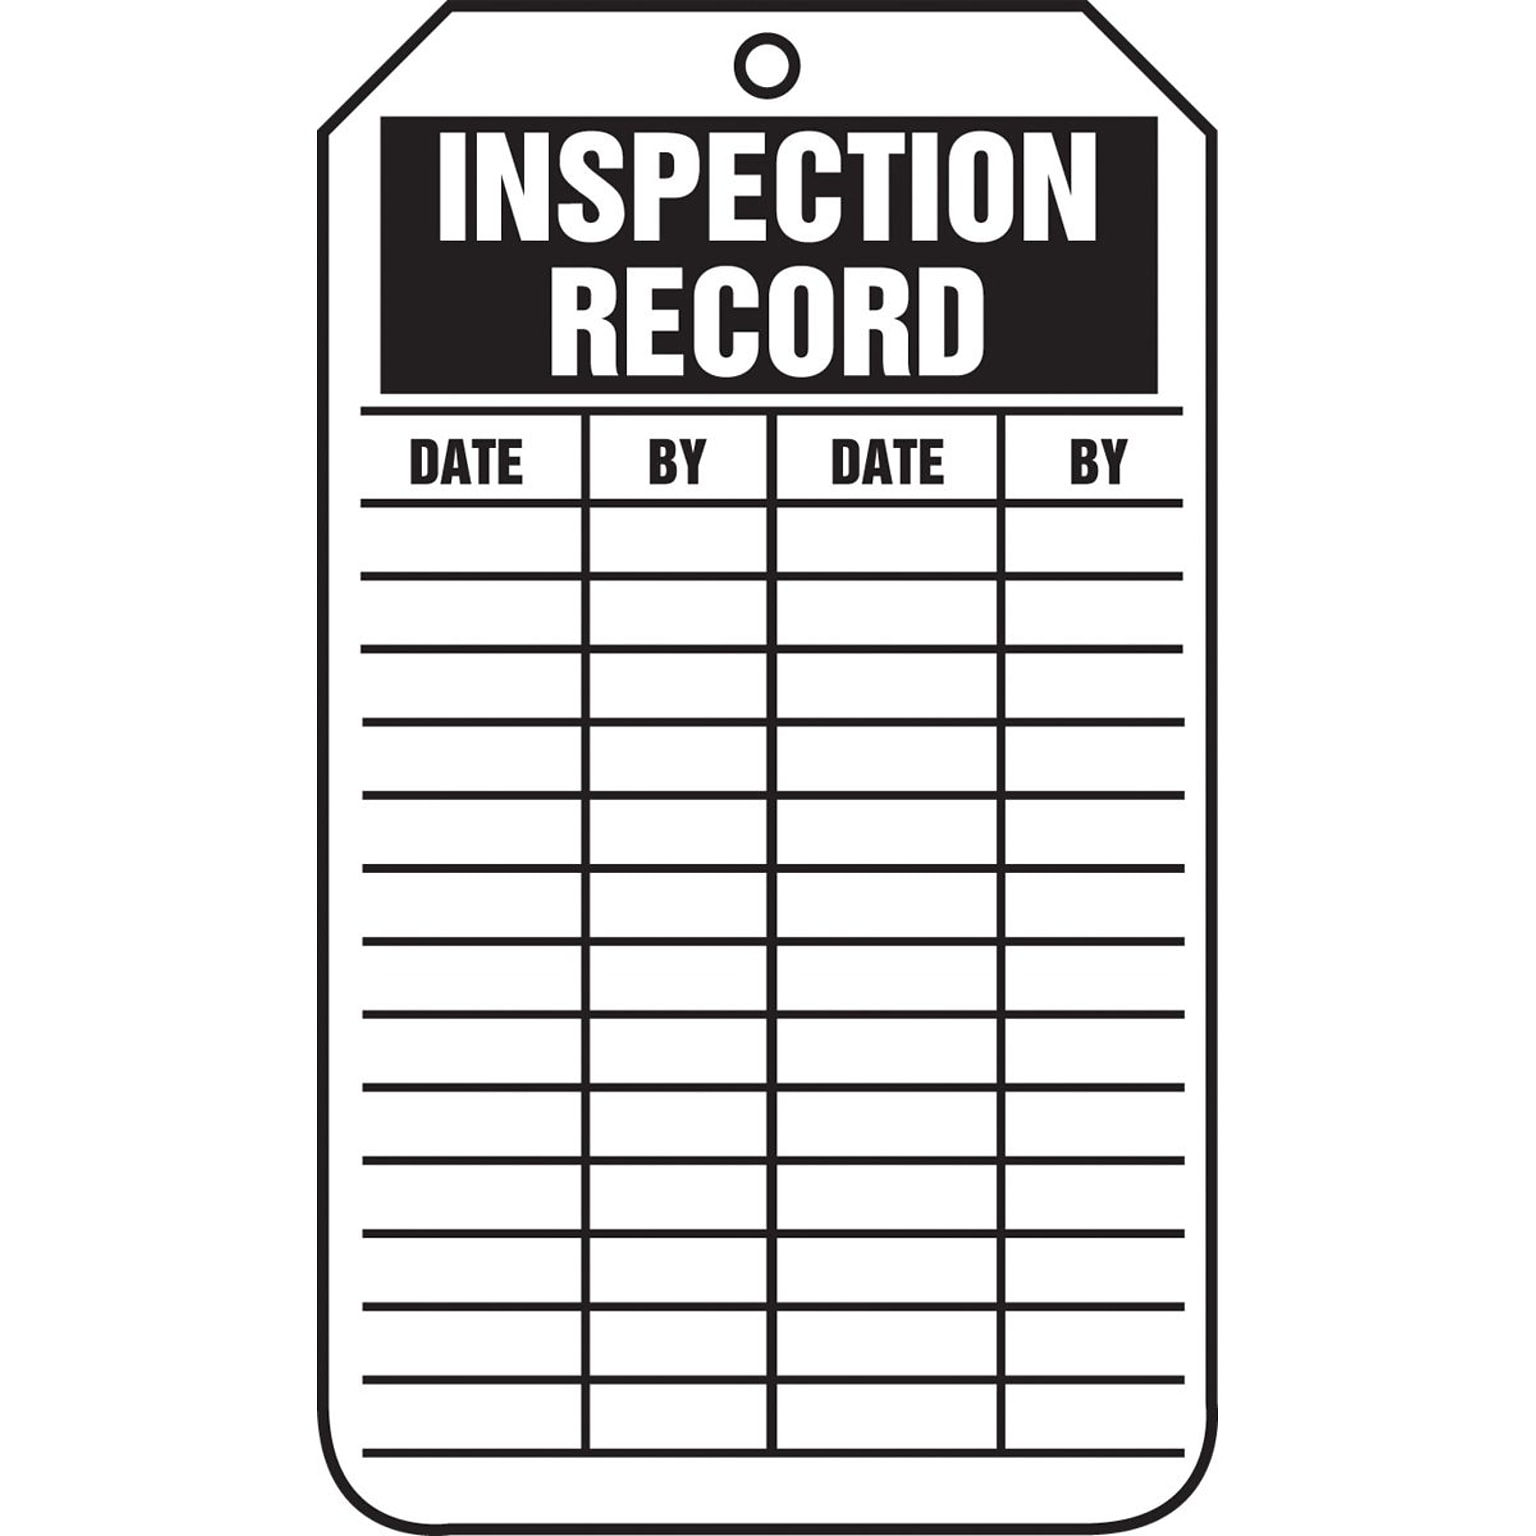 Accuform 5.75 x 3.25 PF-Cardstock Status Tags INSPECTION REC.., Black On White, 25/Pack (TRS307CTP)